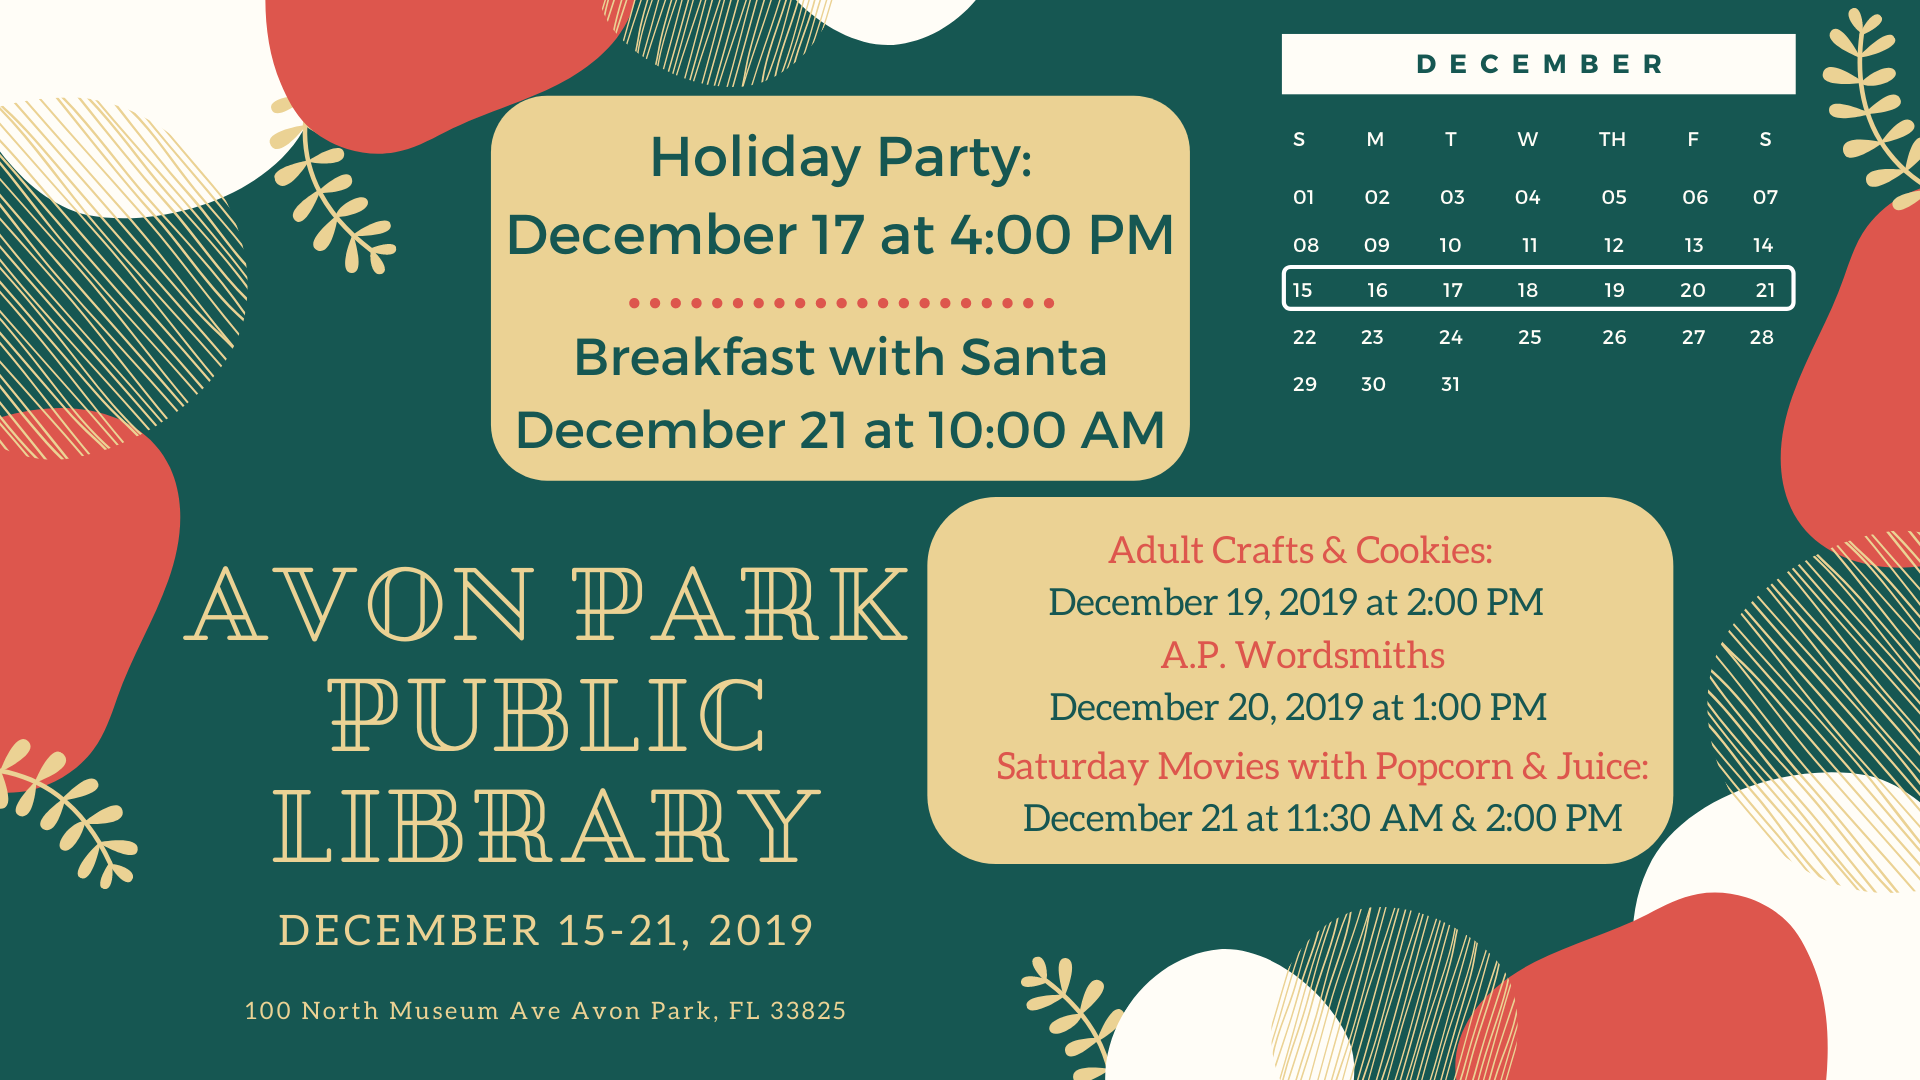 December 15-21, 2019 at the Avon Park Public Library will continue with our regularly scheduled programs and two special events. On Tuesday, December 17, 2019 at 4:00 PM, we will host our Annual Holiday Party & Open House sponsored by our Avon Park Friends of the Library and featuring the band, Lotela Gold. On Wednesday, December 18, we will have story time with craft or coloring at 3:00 PM. On Thursday, December 19, 2019 from 2:00 PM to 4:00 PM is our crafts and cookies for adults. On Friday, December 20, 2019 at 1:00 PM, the Avon Park Wordsmiths will meet. On Saturday, December 21, 2019 we will be having our Breakfast with Santa at 10:00 AM, a movie and popcorn at 11:30 AM and another movie and popcorn at 2:00 PM. Please call 863-452-3803 for movie information or to inquire about any of the activities. 